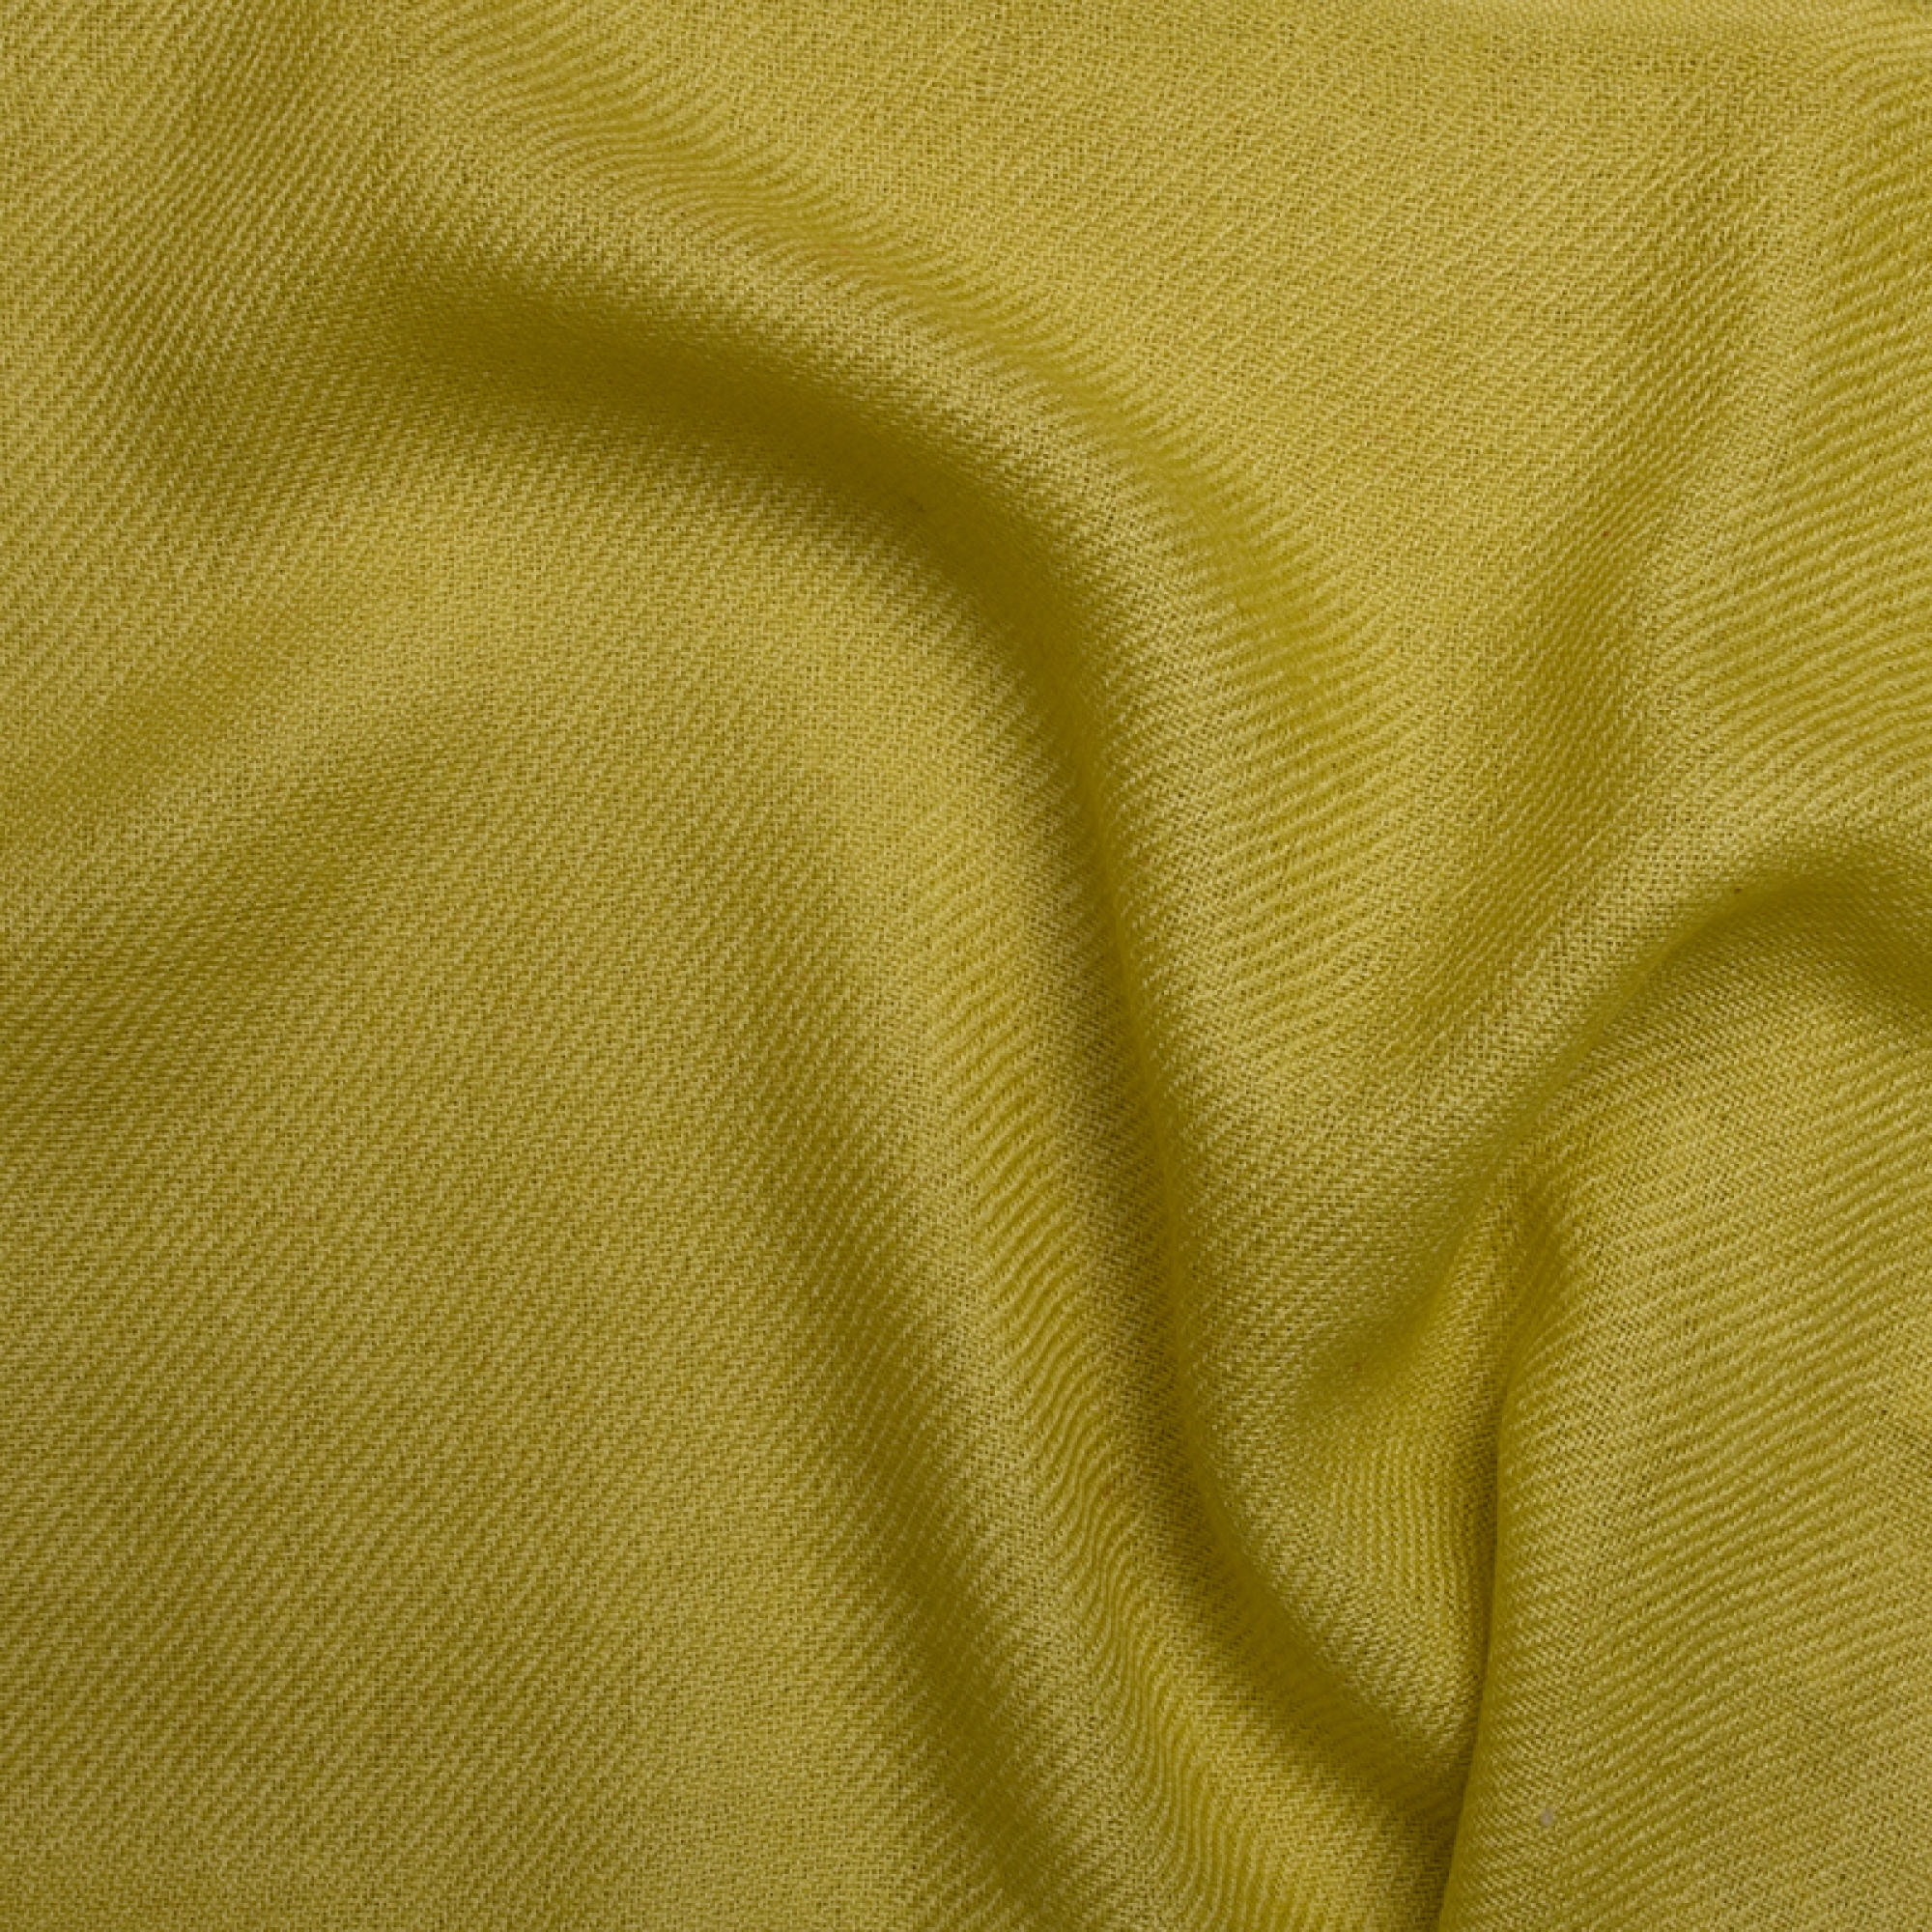 Cashmere ladies cocooning toodoo plain l 220 x 220 sunny lime 220x220cm